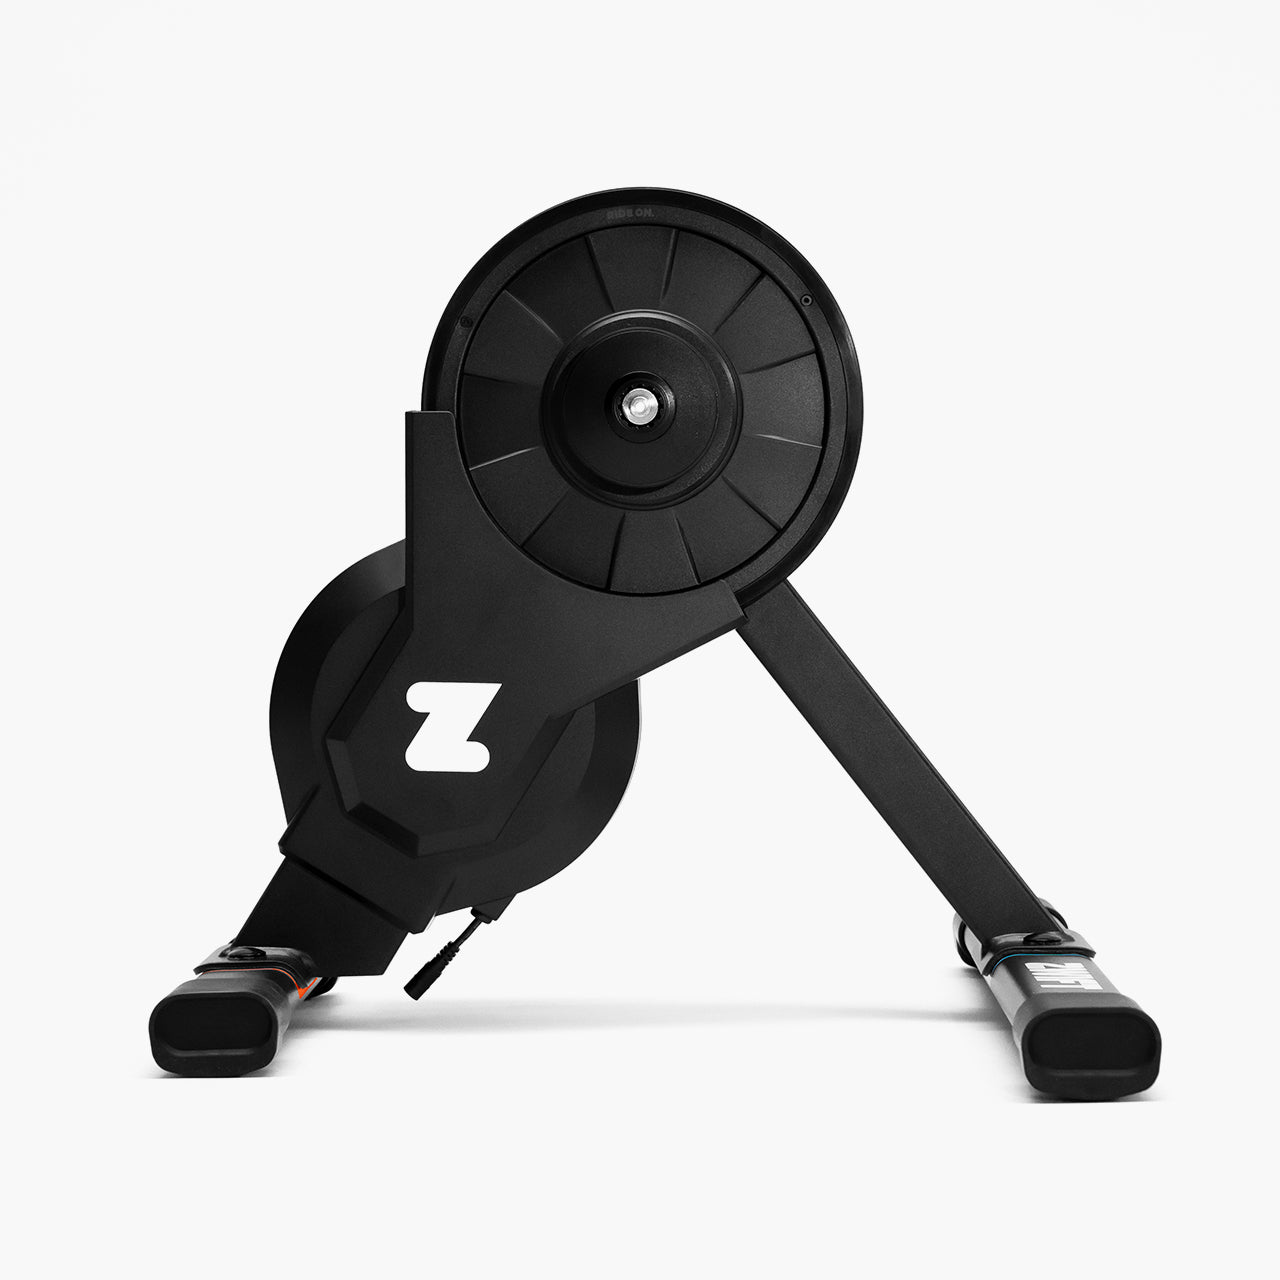 New Zwift Hub One | The Latest Smart Trainer for Indoor Cycling